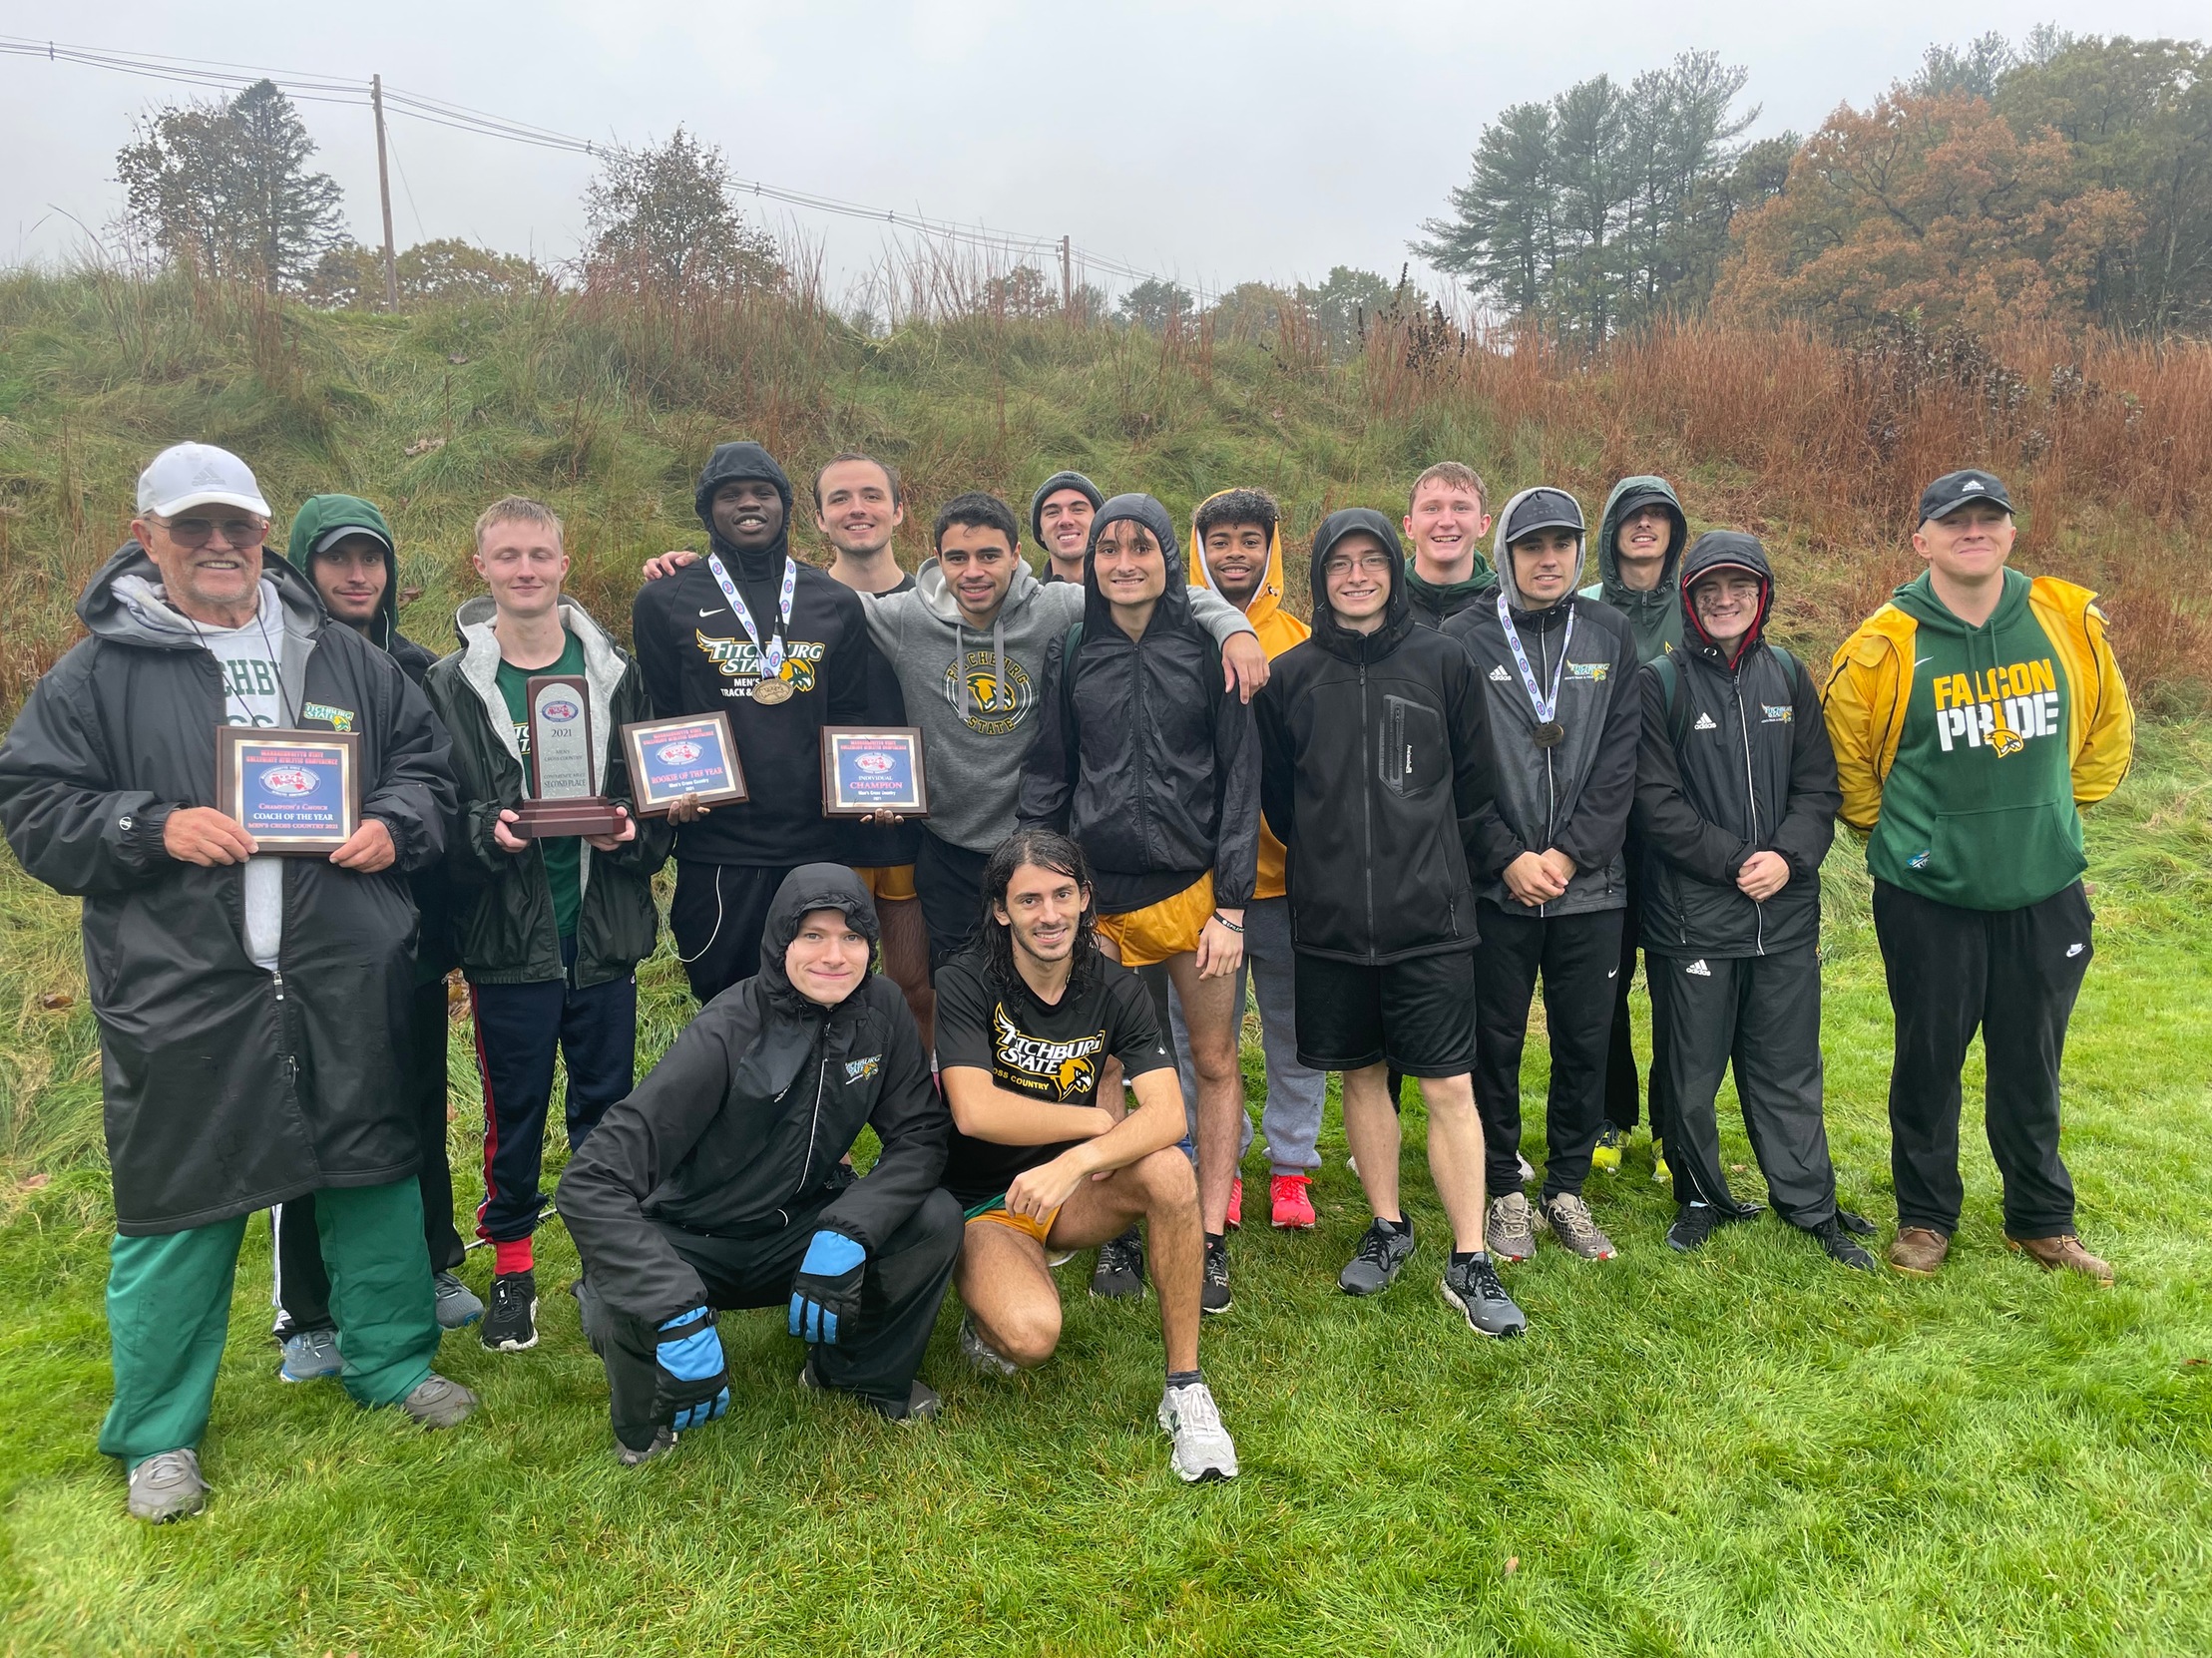 Falcons Finish Runner-Up at MASCAC Men's Cross Country Championship